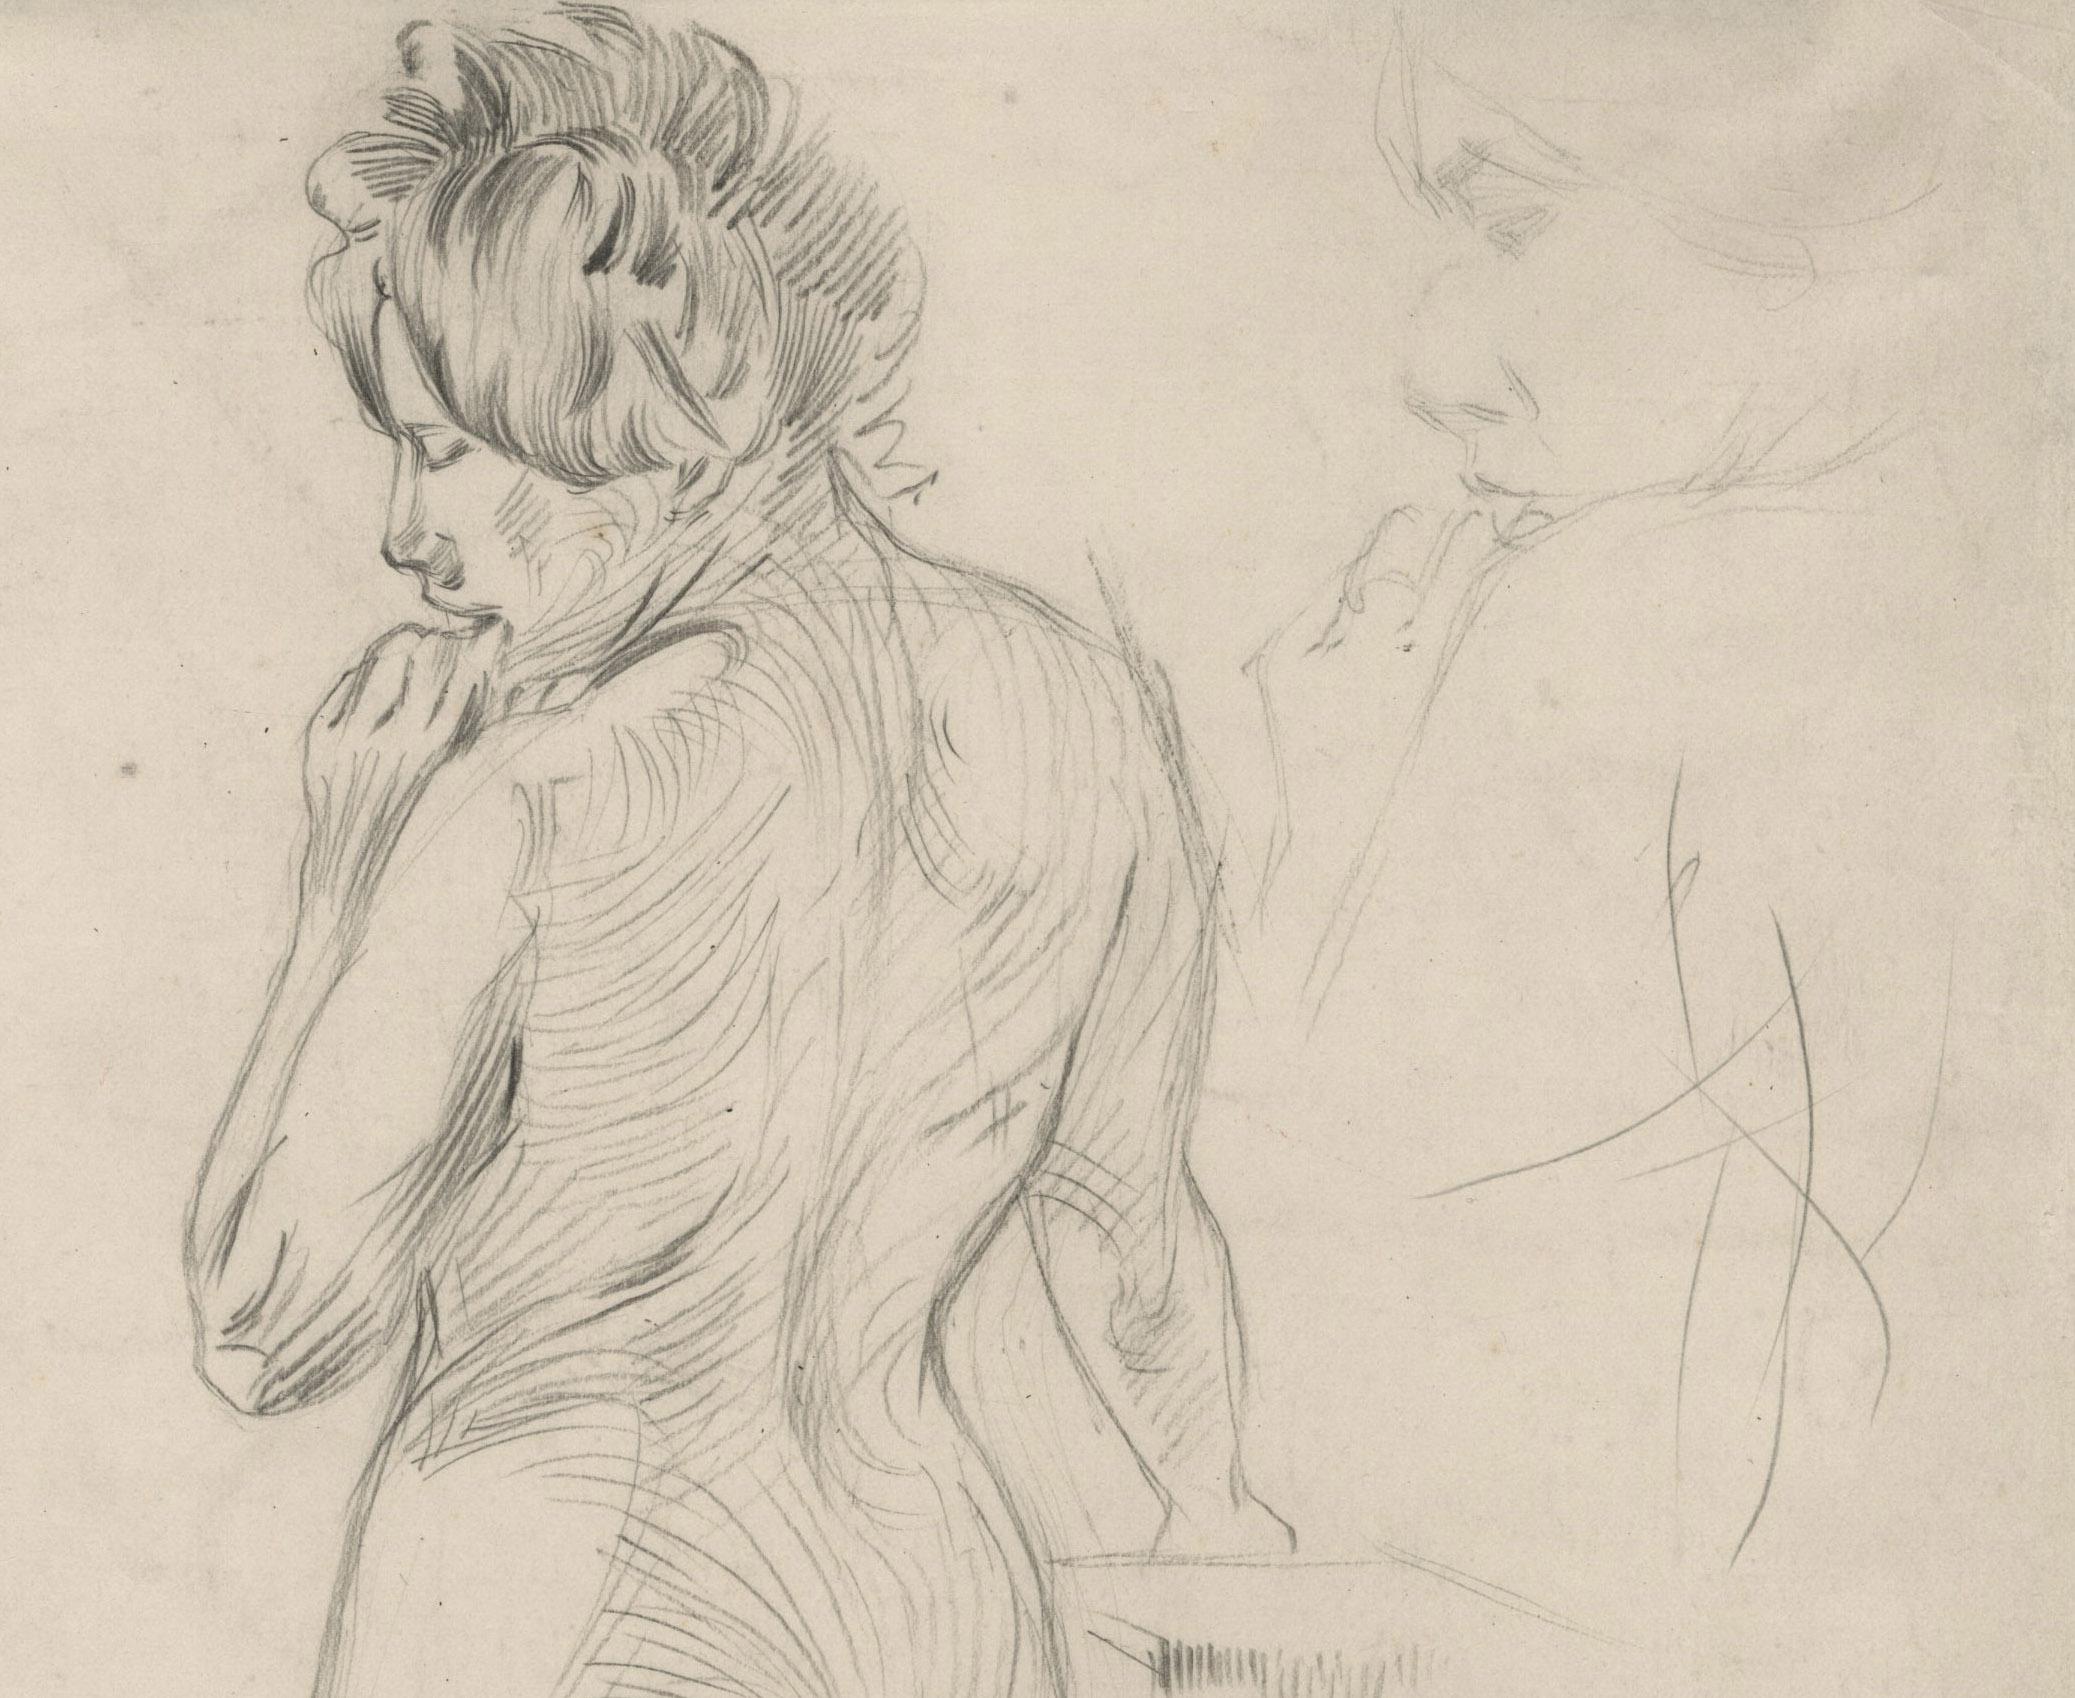 Standing Nude, hand on a plinth
Graphite on paper, c. 1900
Signed with a double tri lobed symbol upper left corner (see photo)
Condition: excellent, slight surface dirt
Sheet size: 12 3/4 x 8 1/2 inches
Provenance: Eric G. Carlson, art historian and